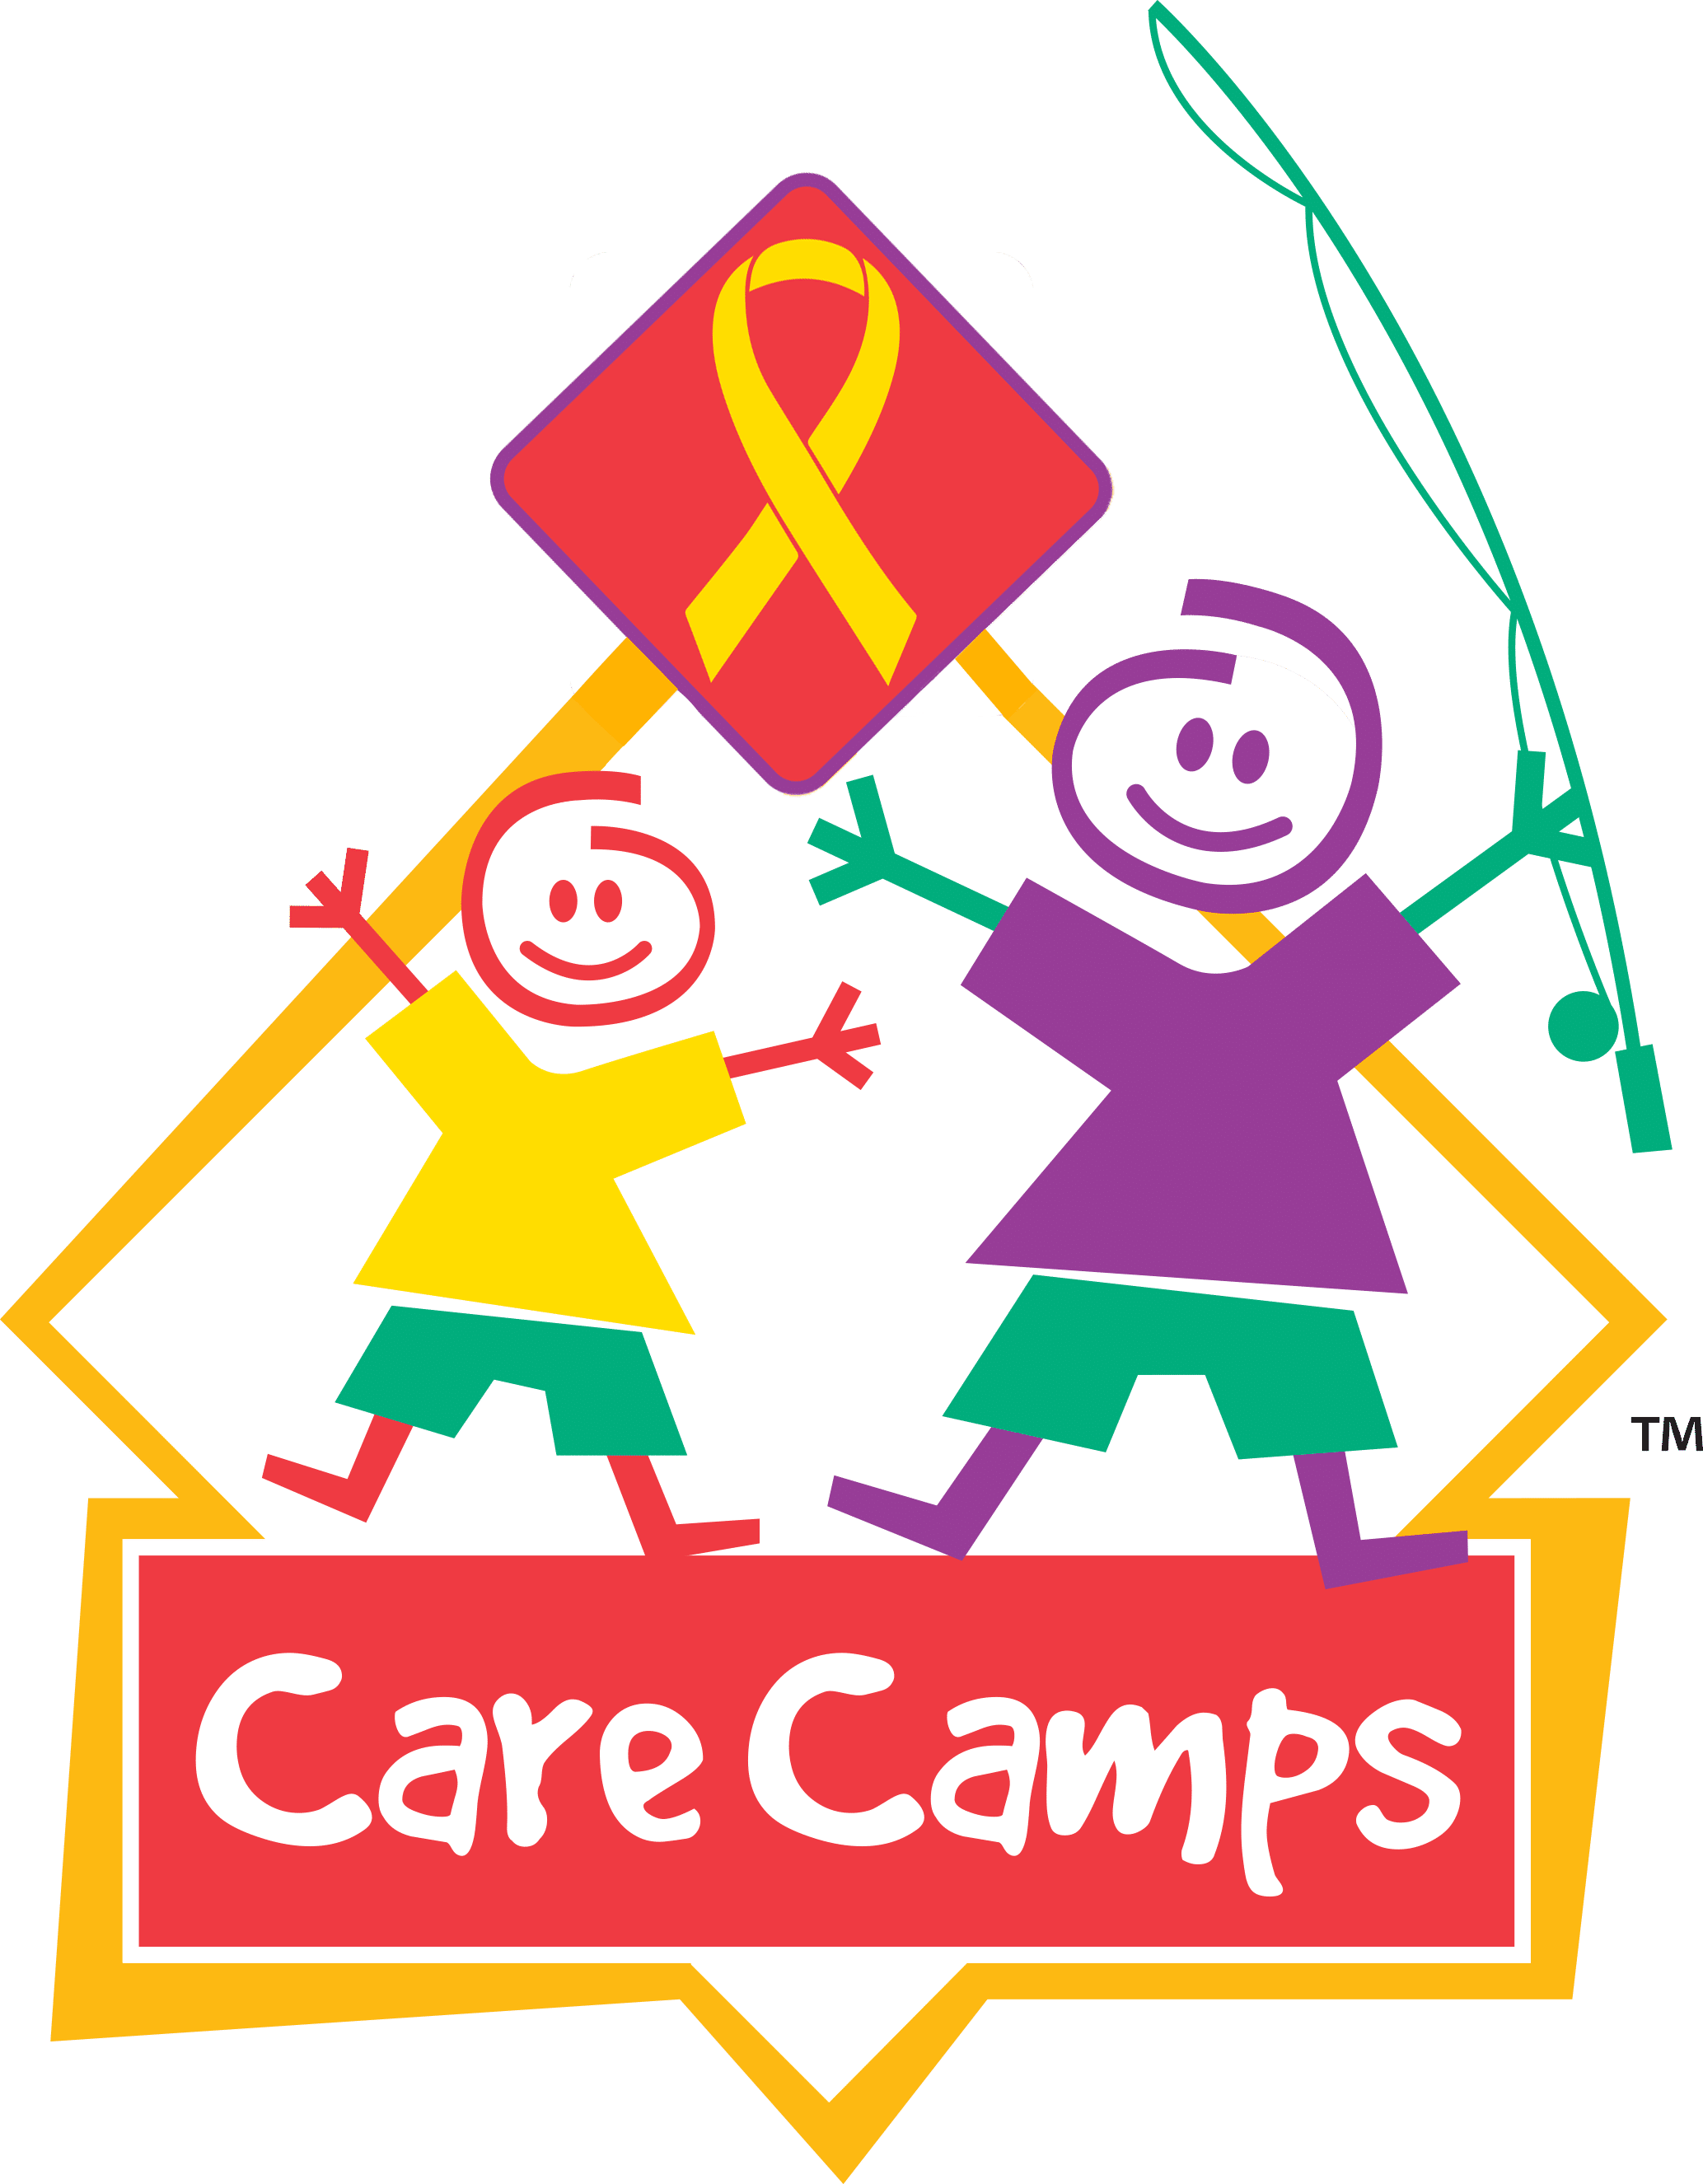 Care Camps logo with ribbon PNG translucent background (1)